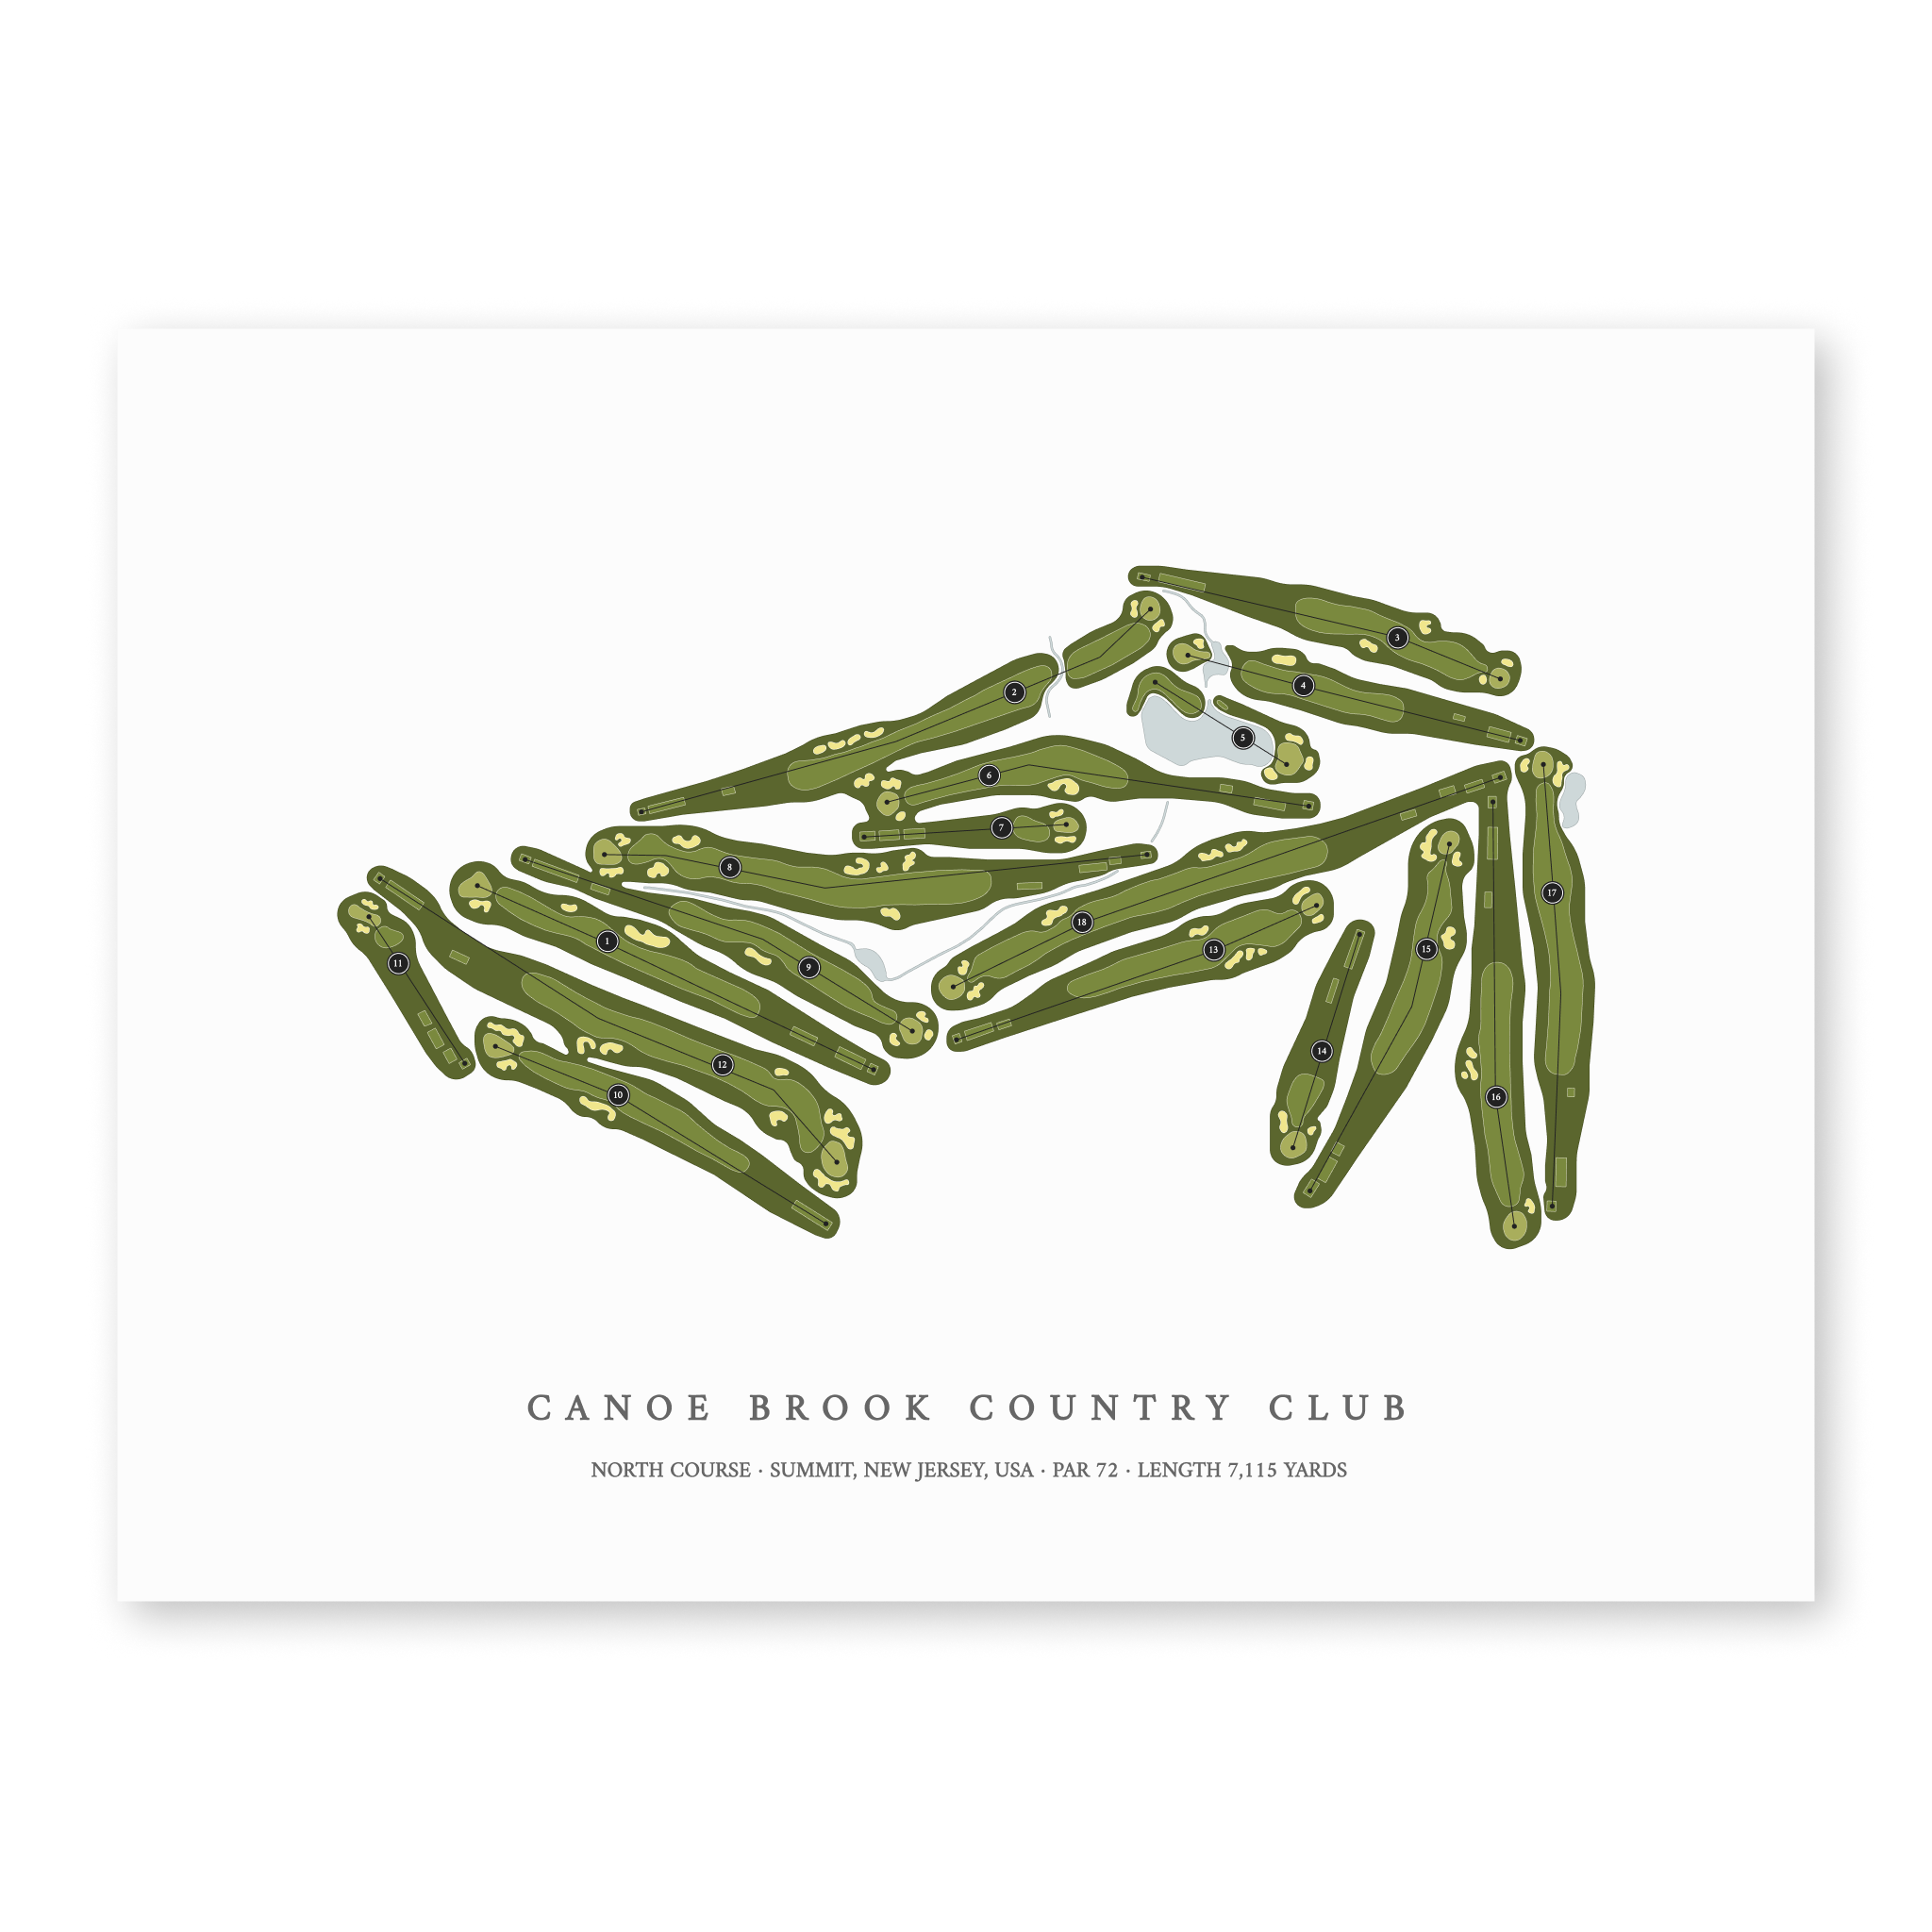 Canoe Brook Country Club - North Course| Golf Course Print | Unframed With Hole Numbers #hole numbers_yes